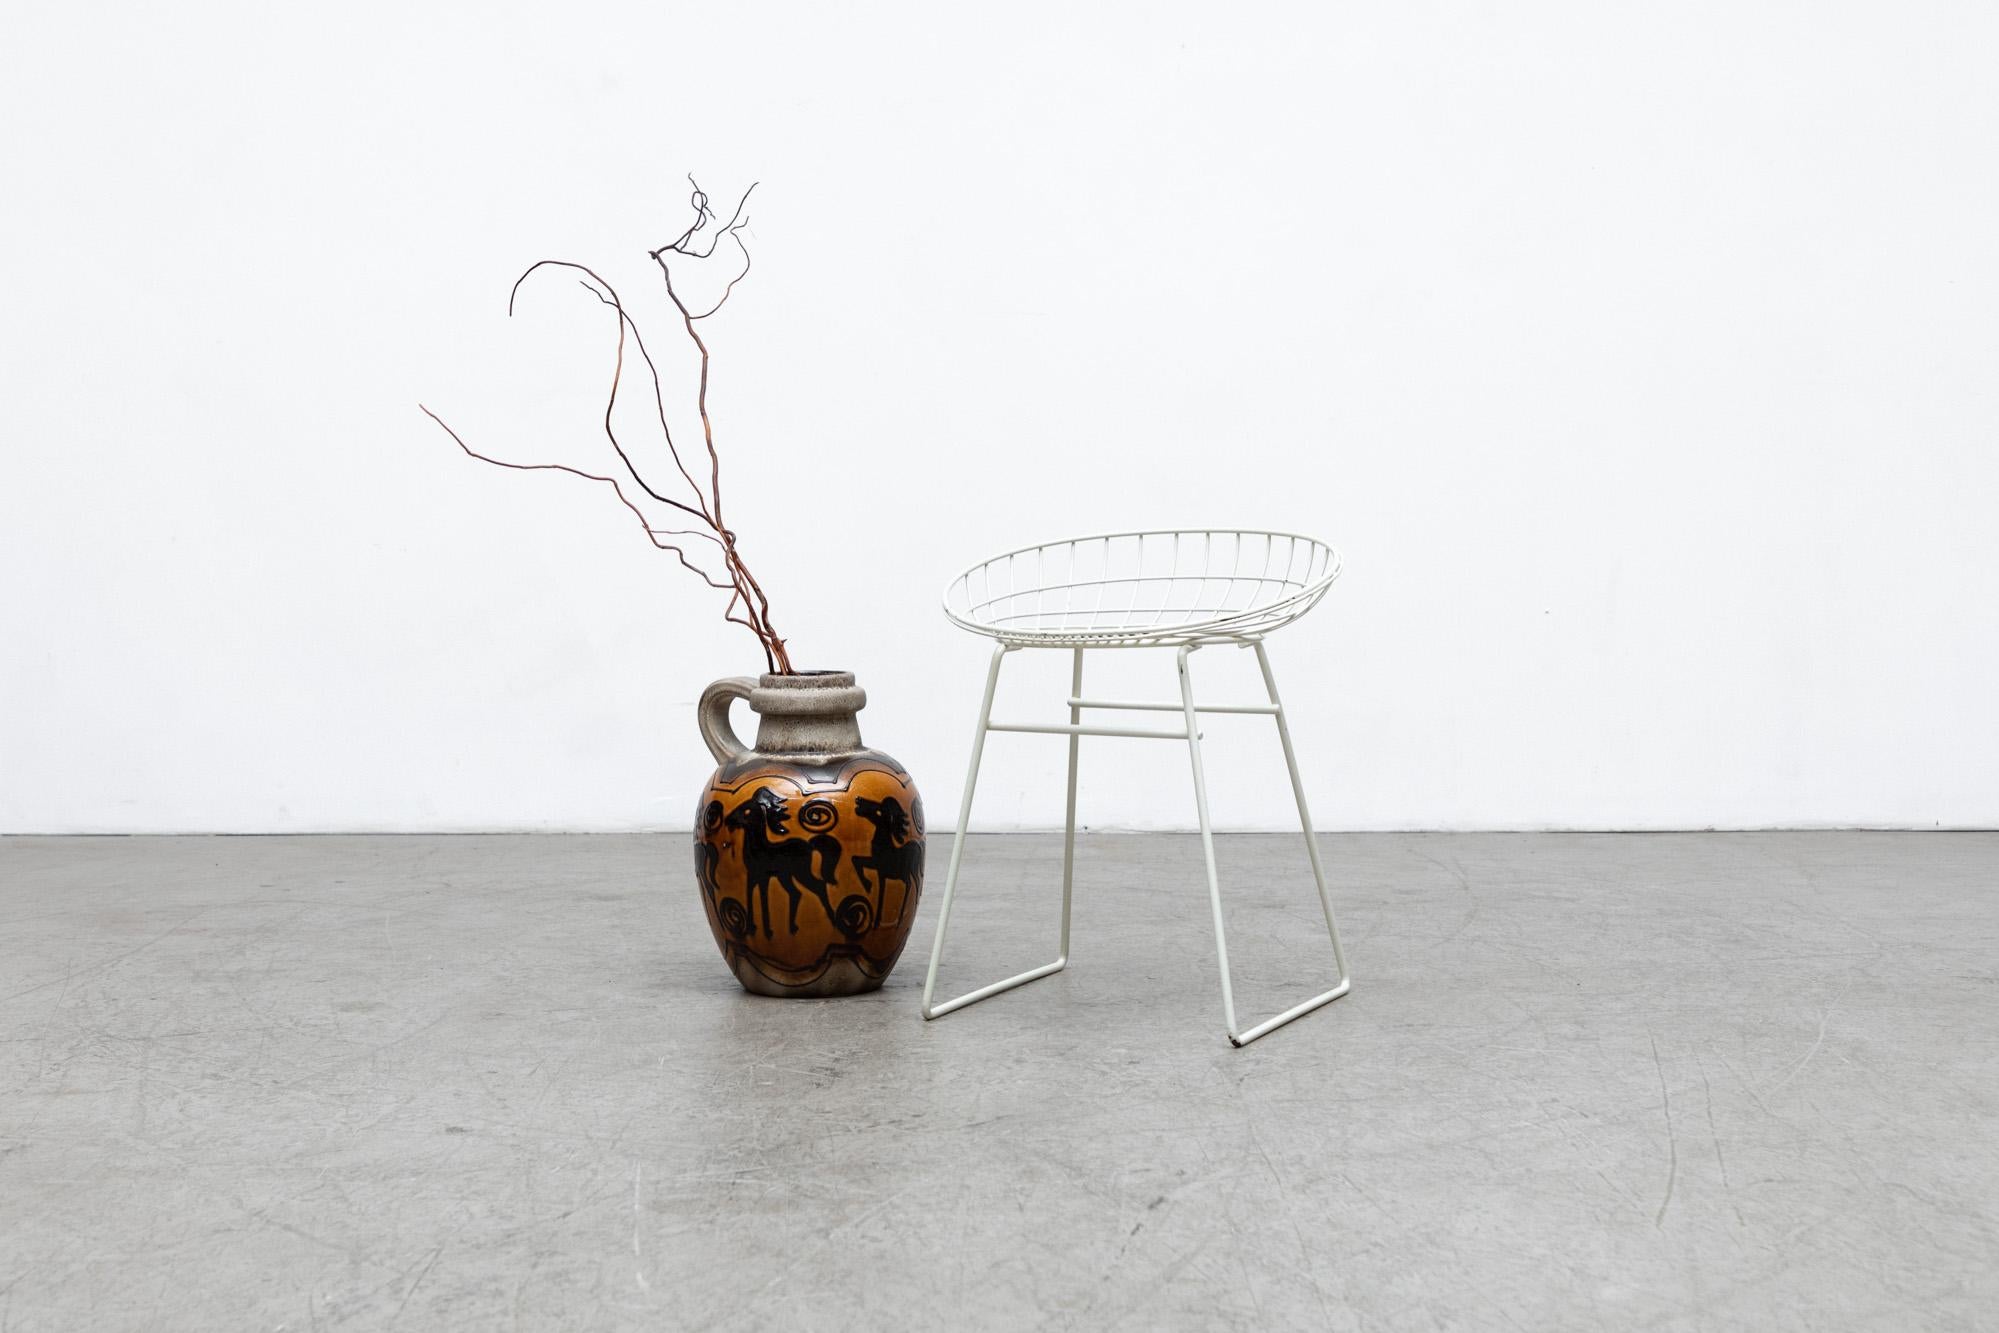 White Enameled Wire Vanity Stool by Cees Braakman and Adriaan Dekker for Pastoe. In original condition with visible wear and patina to enamel. Wear is consistent with its age and use.